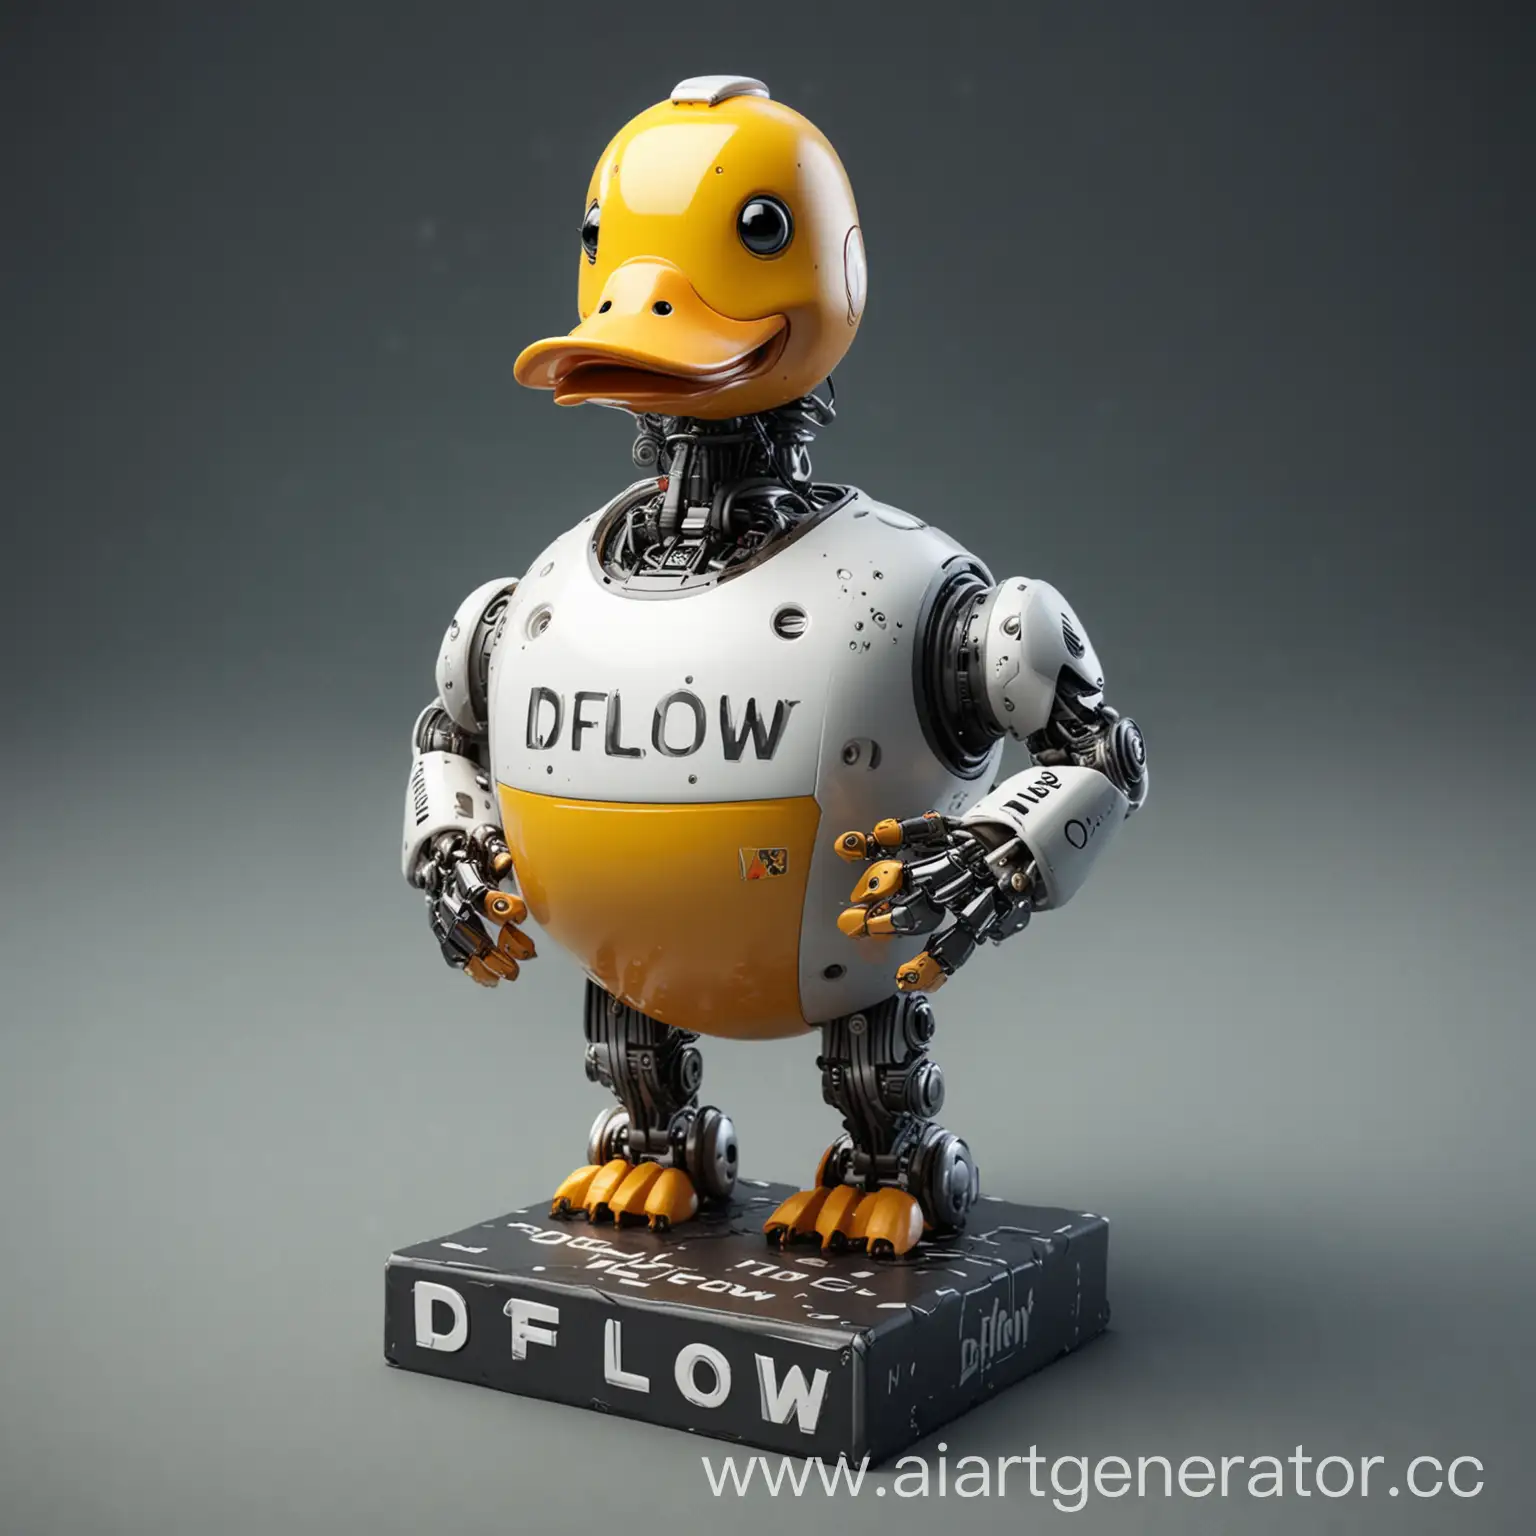 DFlow-Robot-Duck-Futuristic-Toy-with-Customizable-Inscription